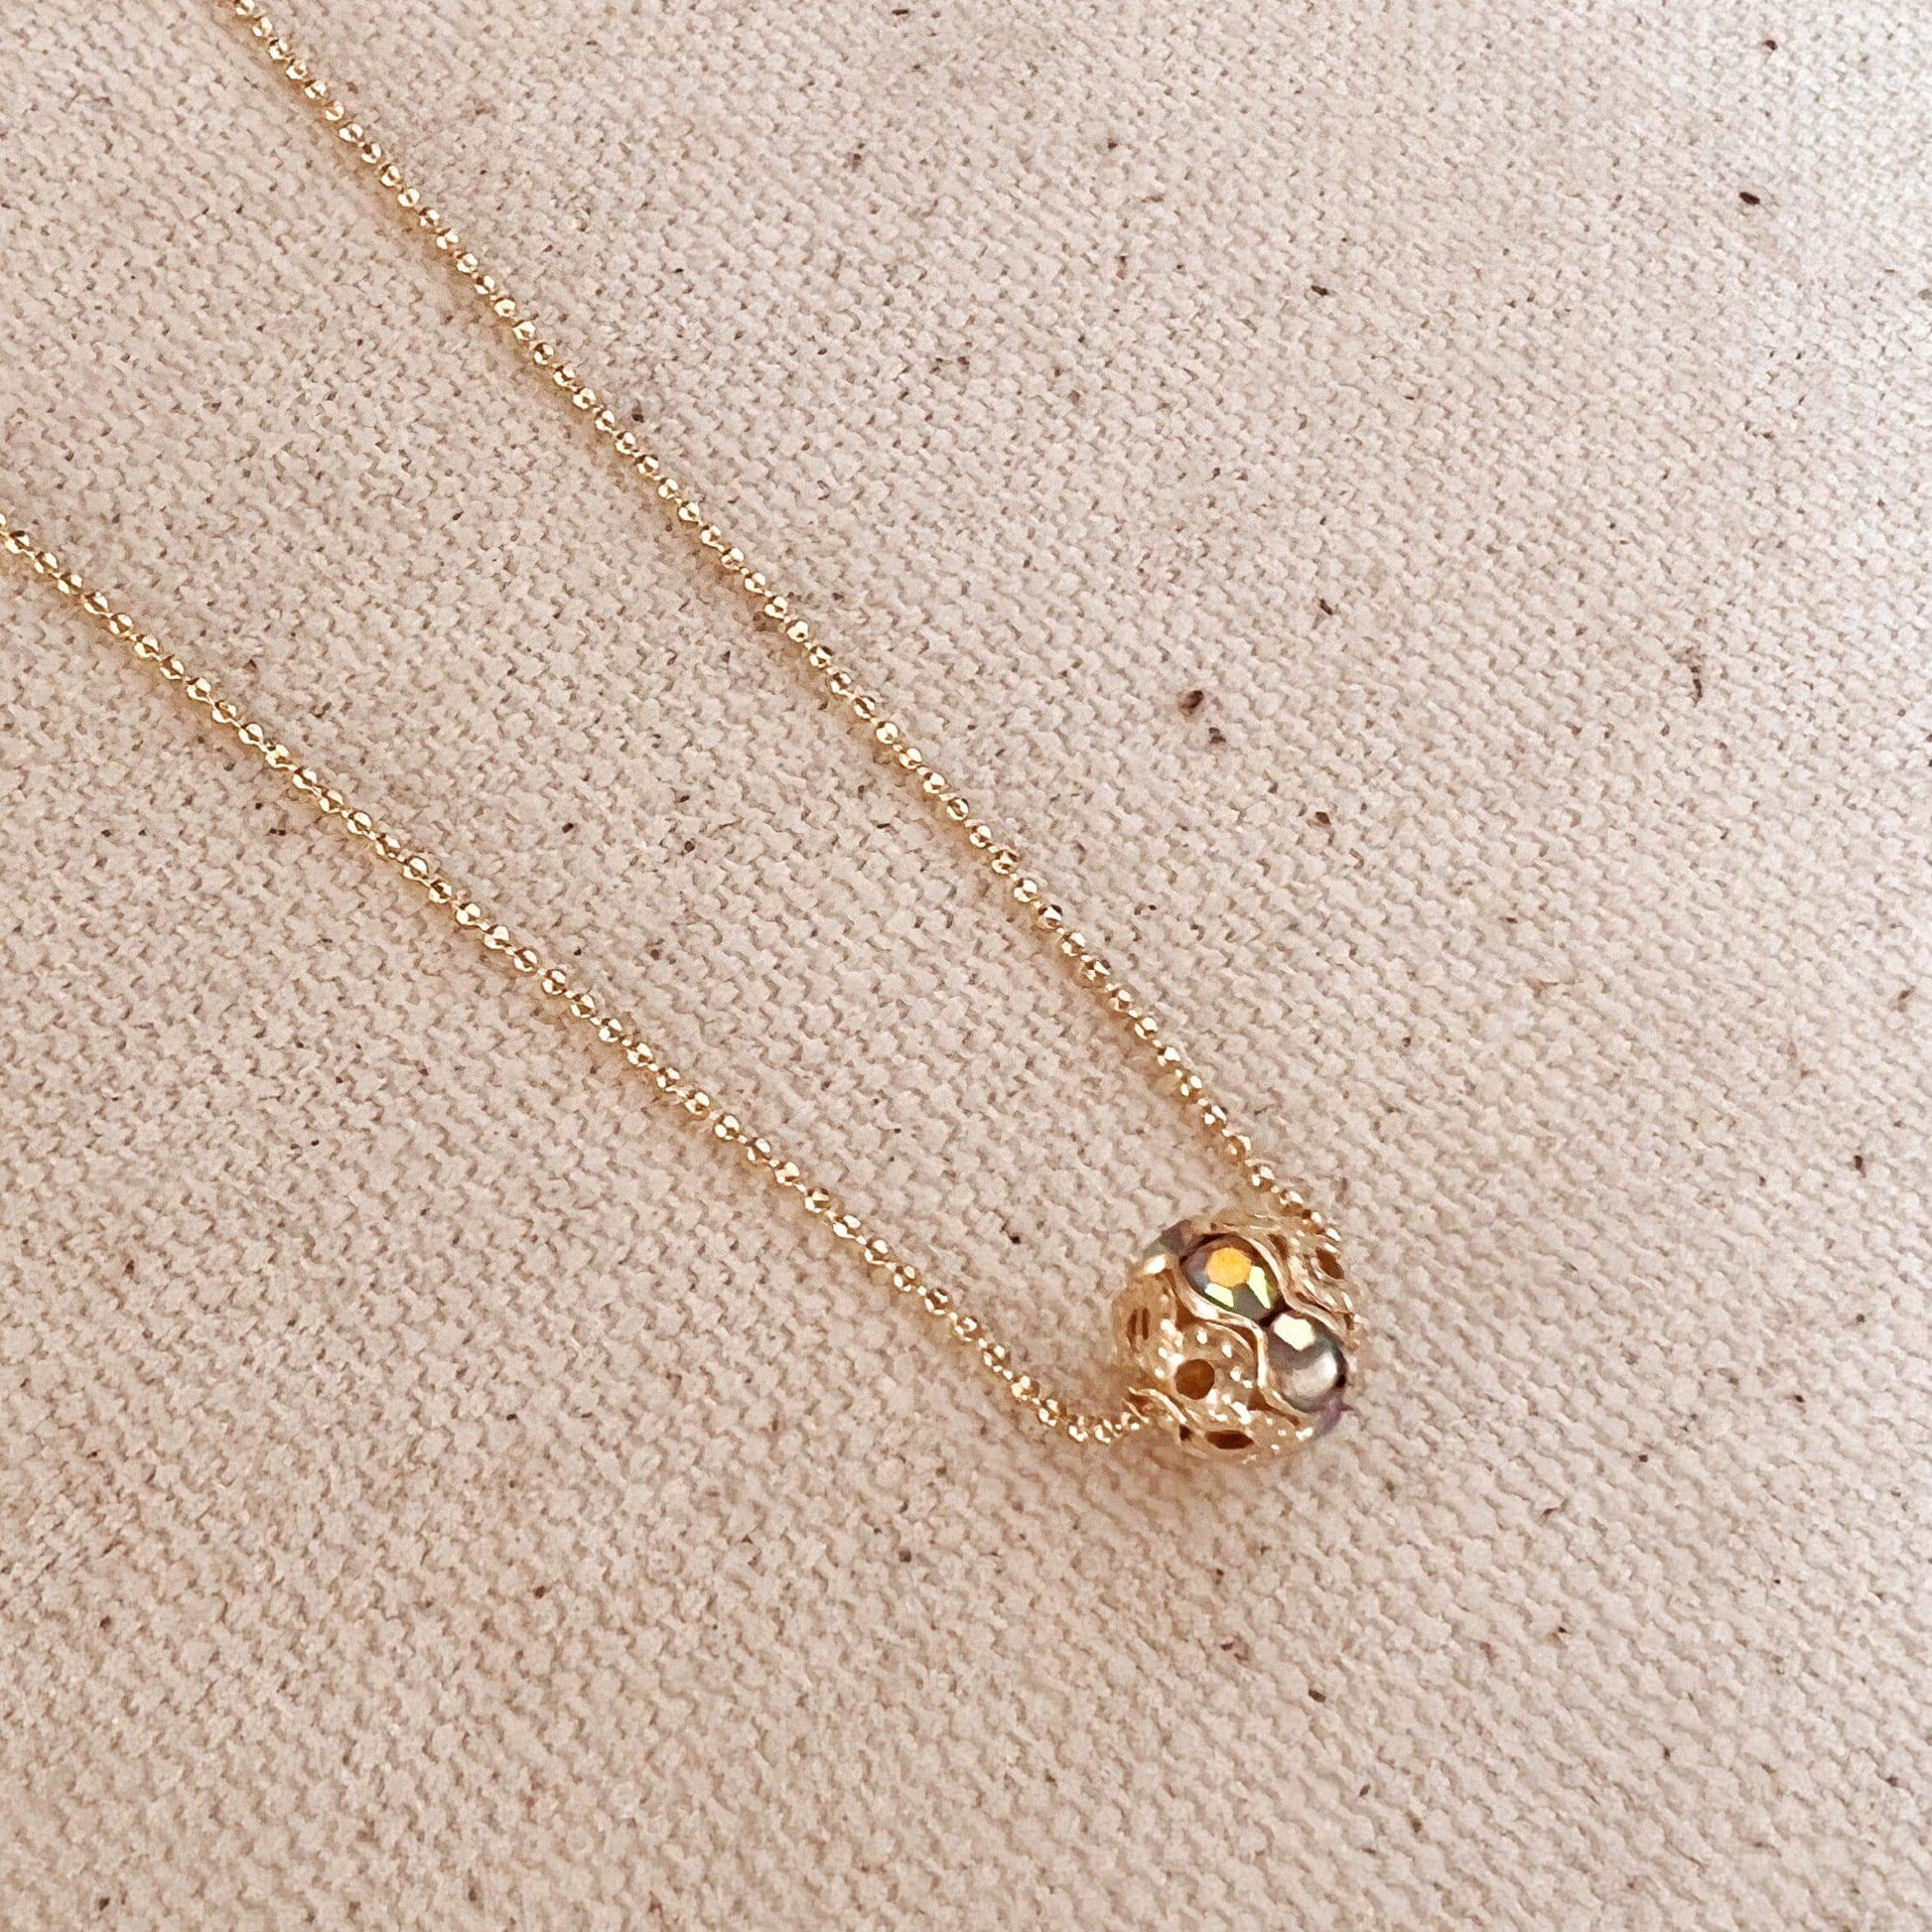 GoldFi 18k Gold Filled Necklace with Solitaire Bead